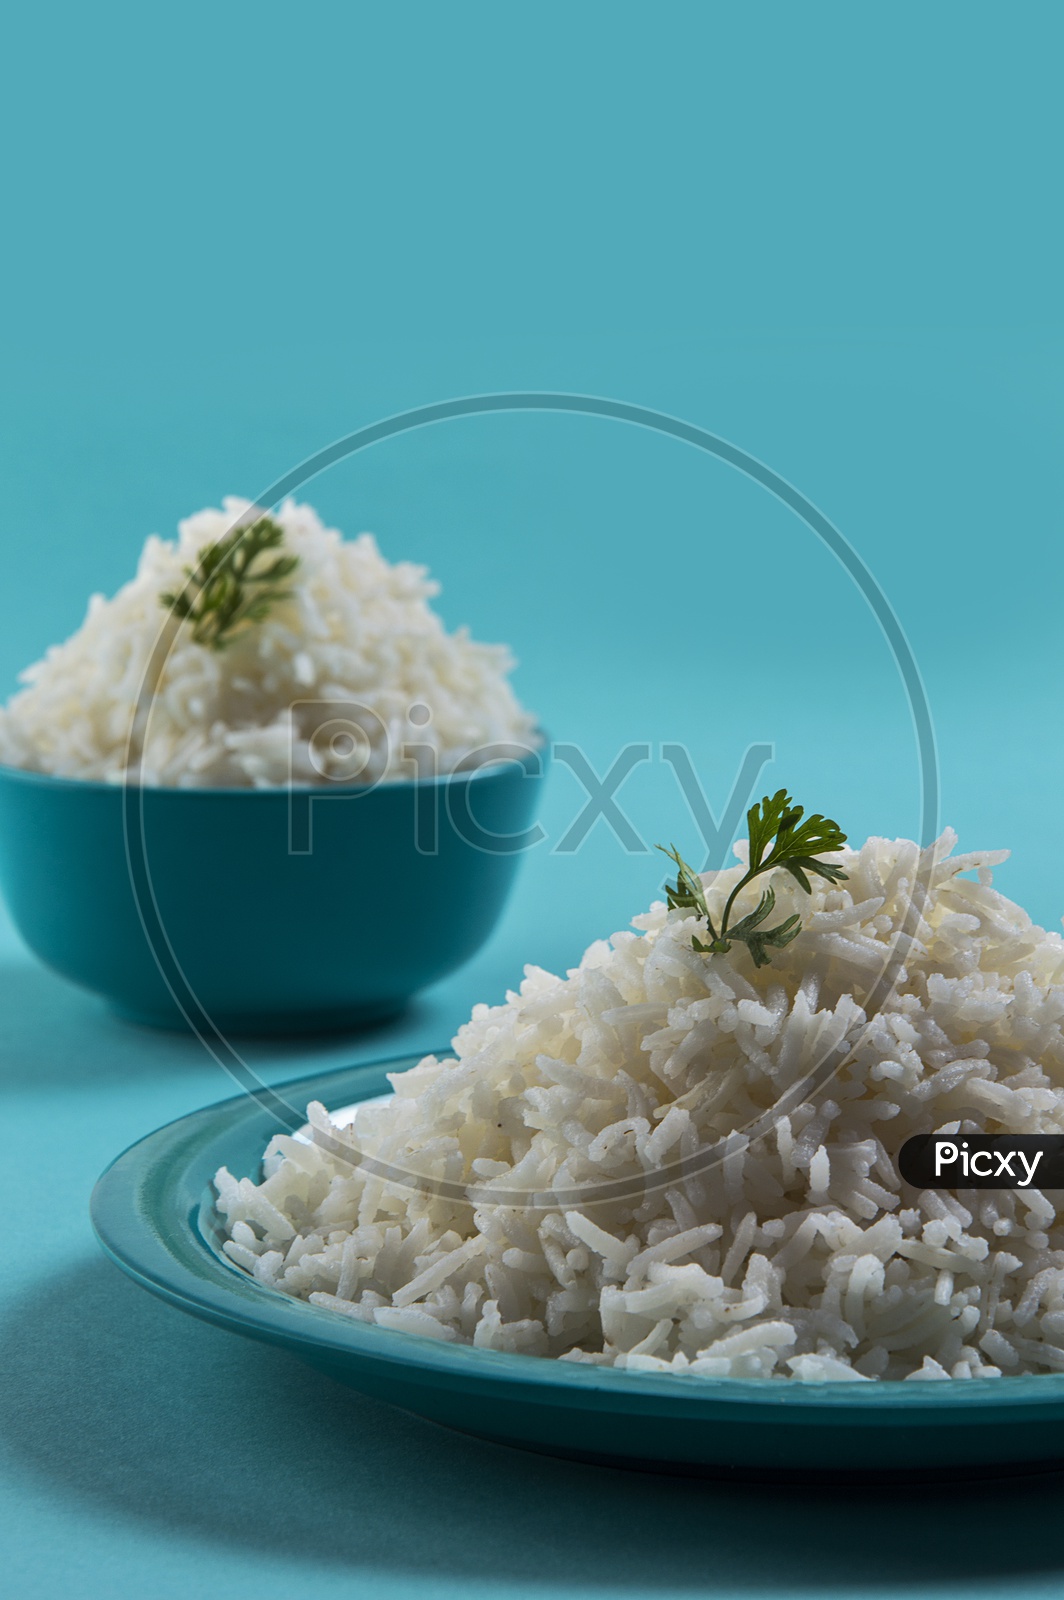 Cooked plain white basmati rice in a blue plate and bowl on blue background